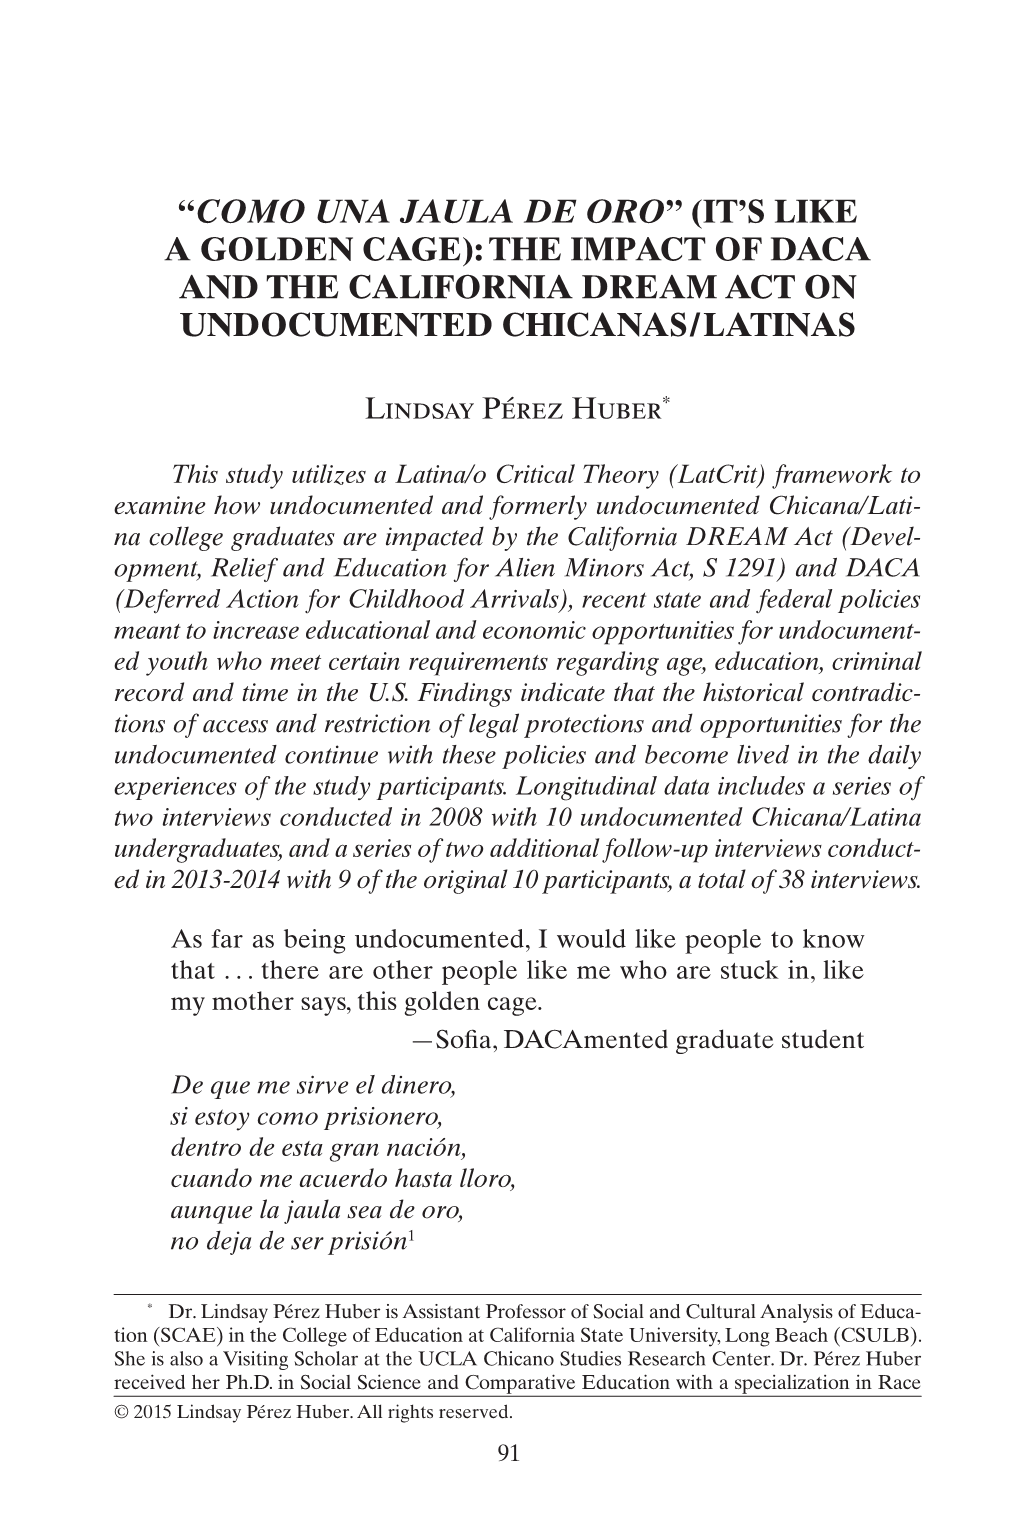 The Impact of Daca and the California Dream Act on Undocumented Chicanas/Latinas